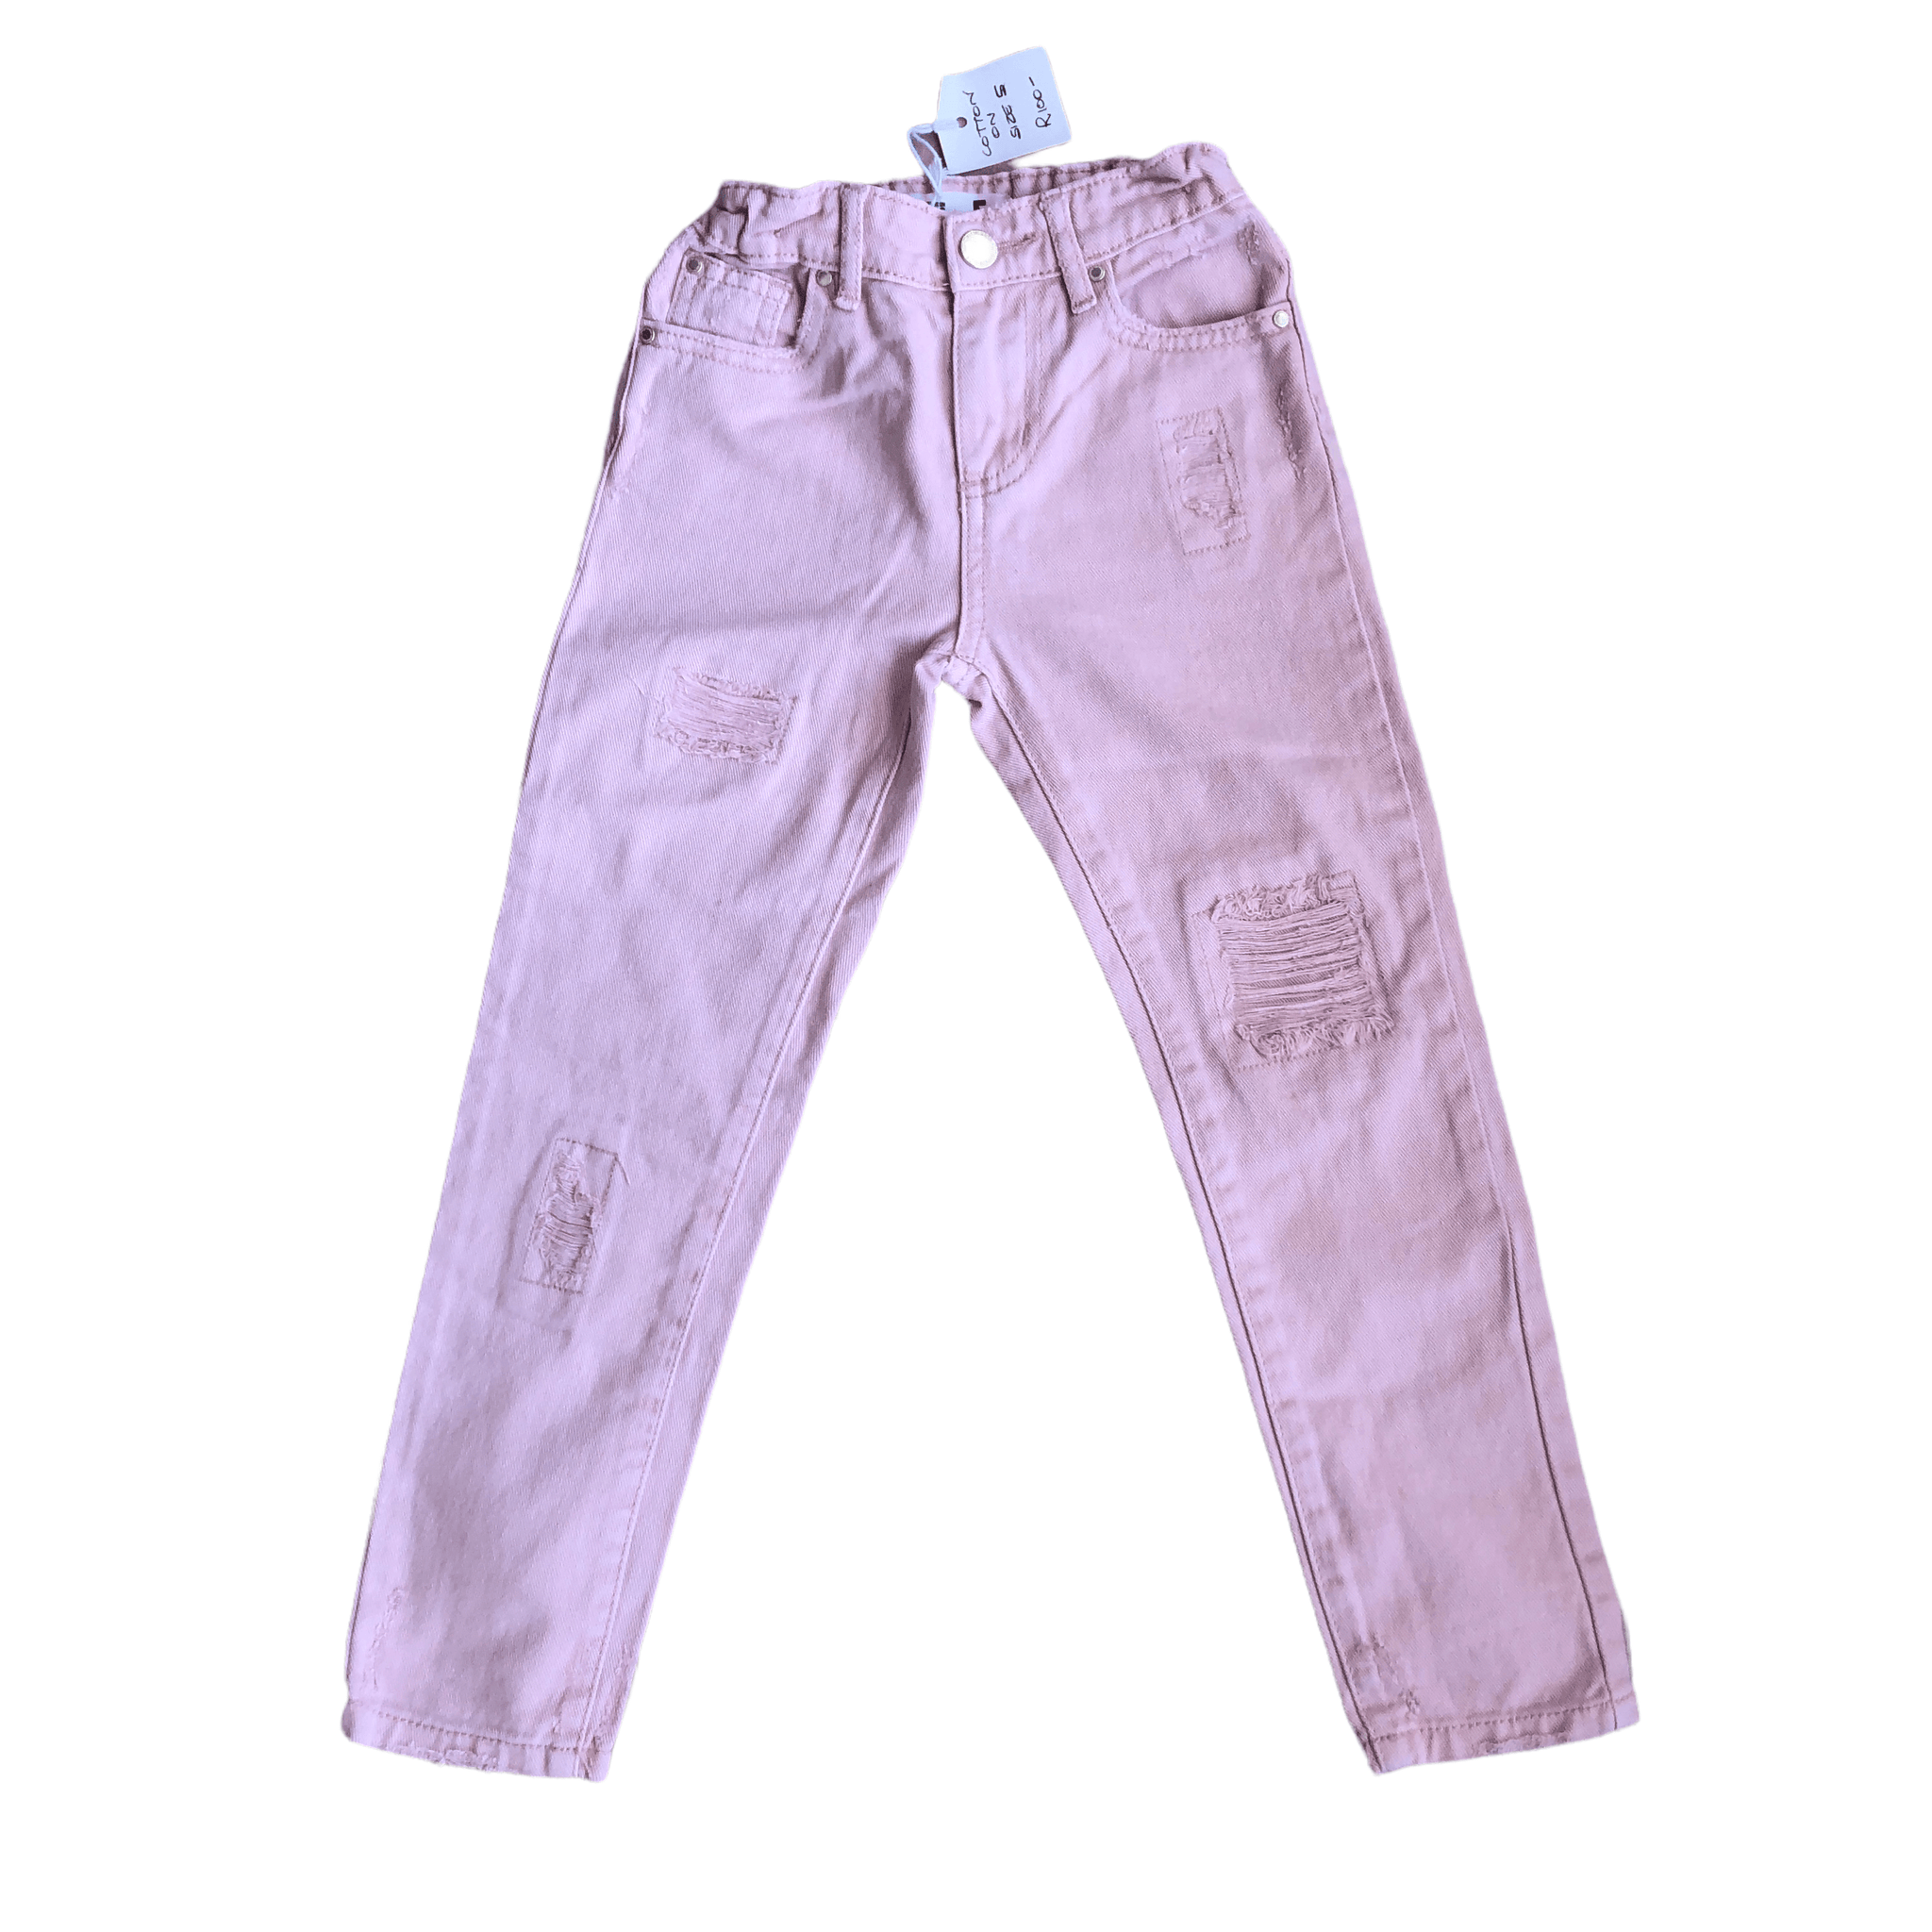 Pre-Owned Cotton On - Pink Jeans (Age 5) The Re-Generation